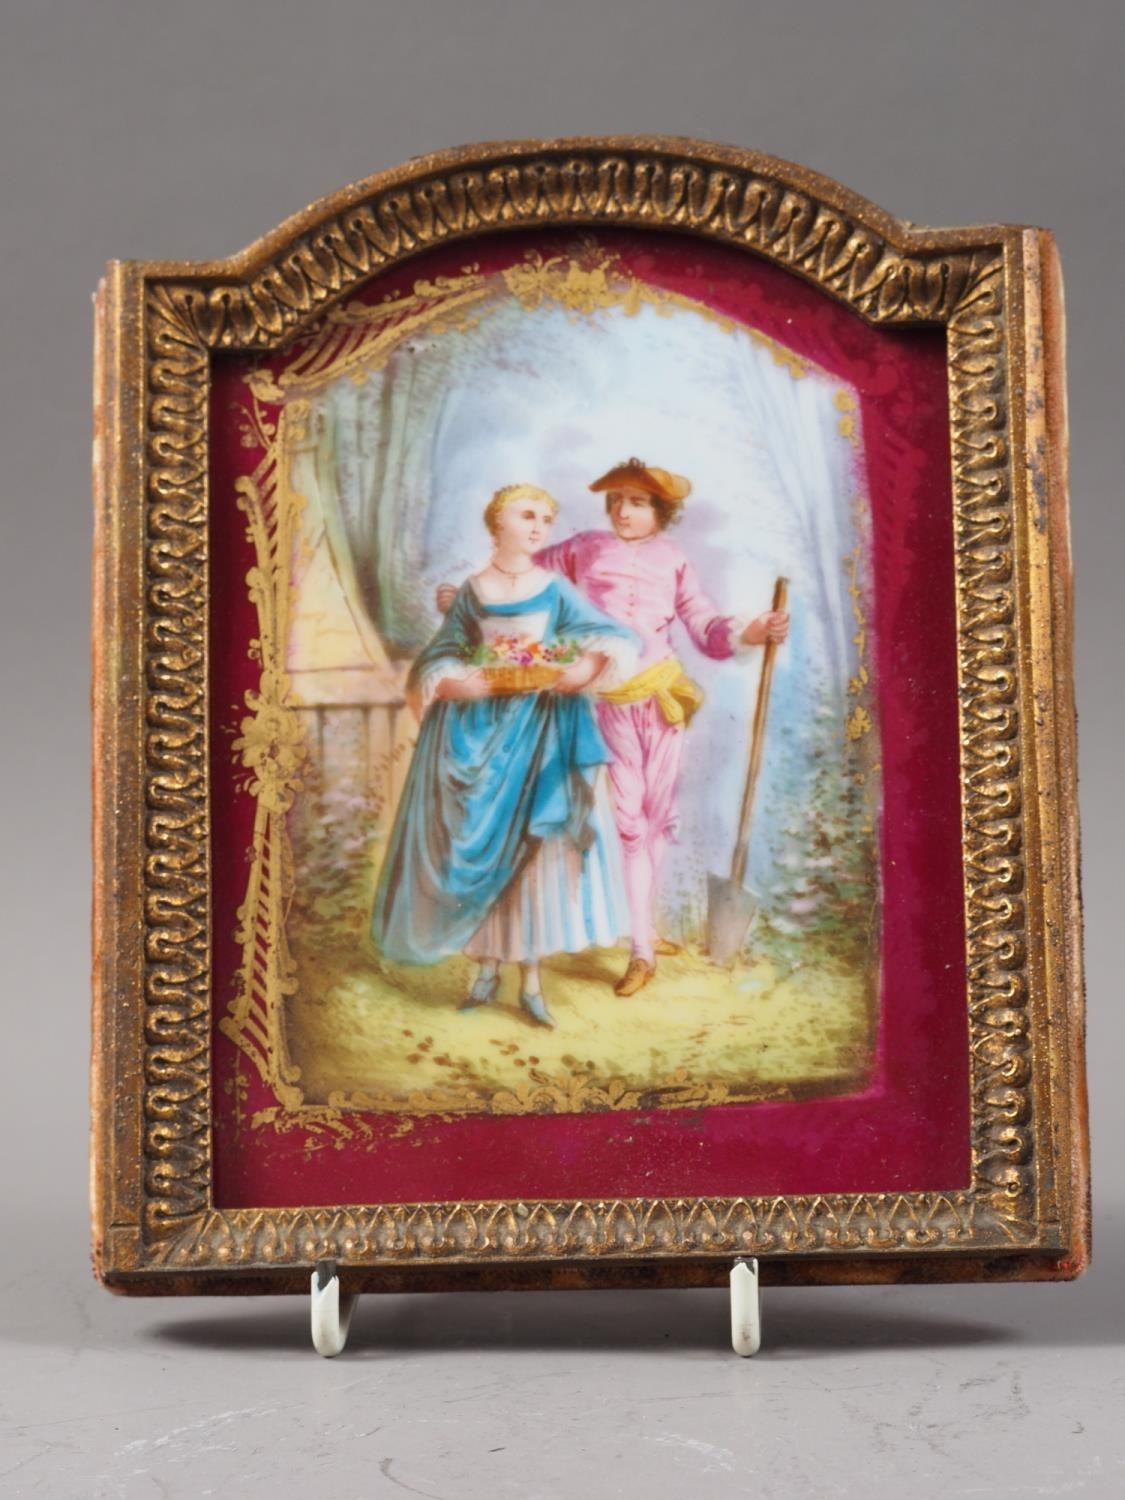 An early 19th century porcelain plaque with gardener figures, in gilt frame, 6 3/4" high